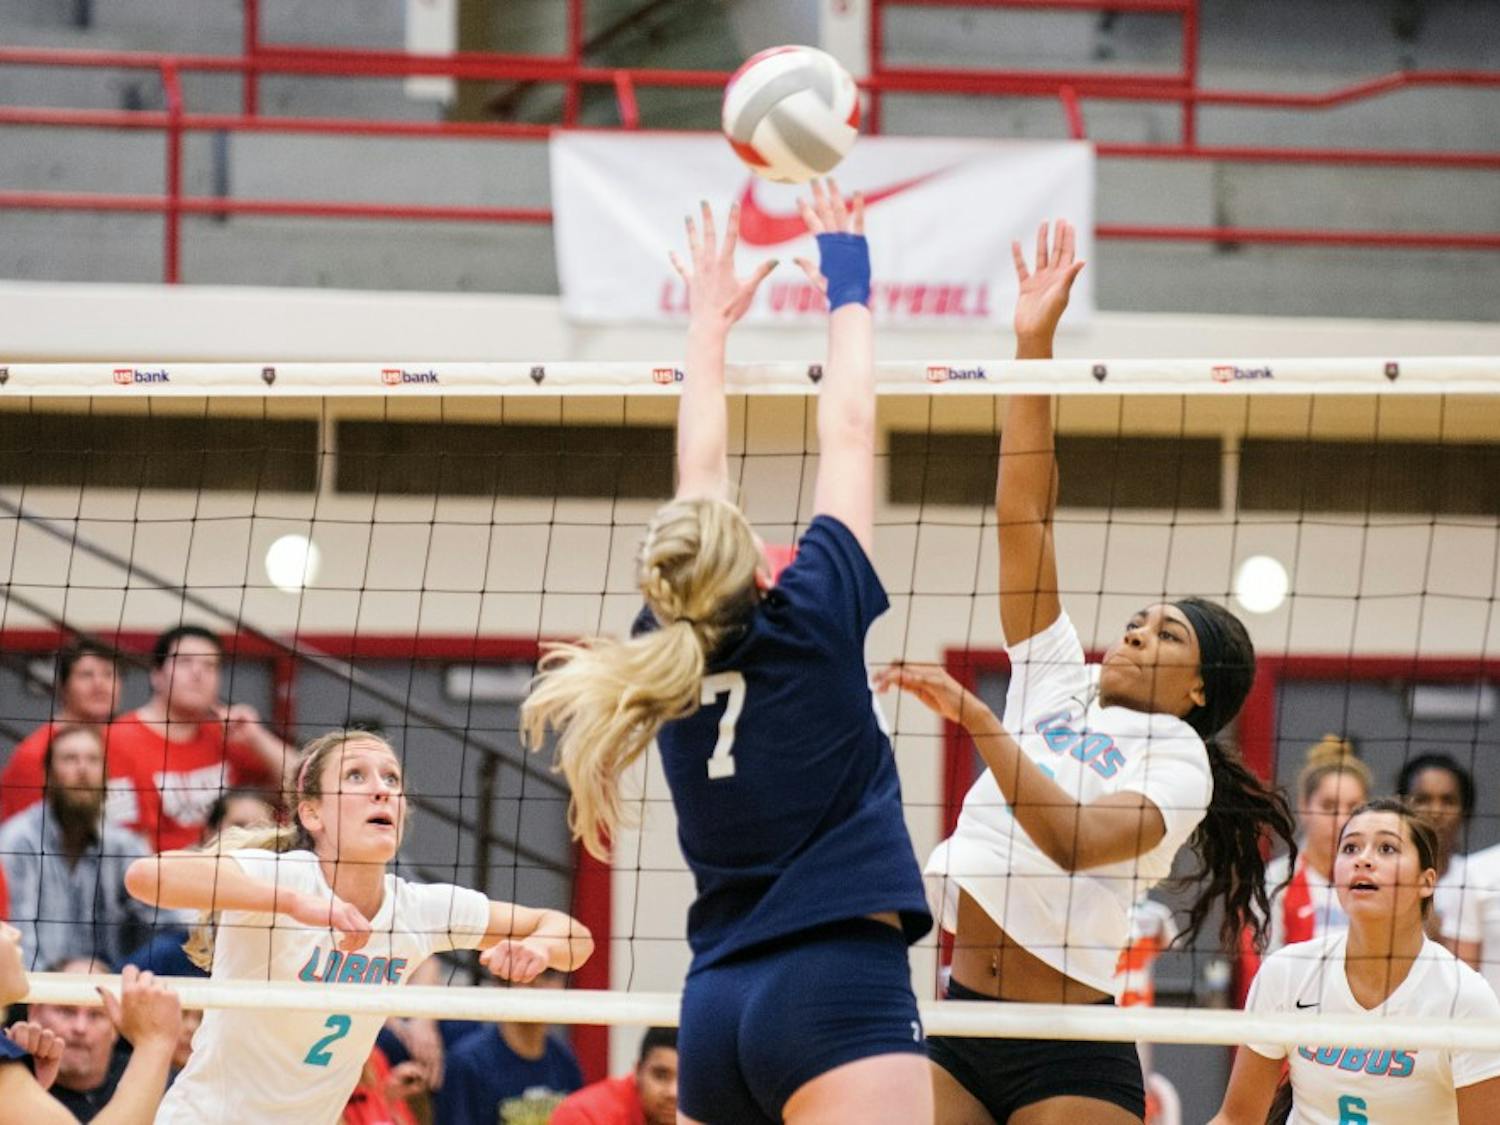 Lobos Simone Henderson reaches above the net to block a Nevada players attack during their game September 26, 2015. The Lobos are expected to play Colorado State October 8. 